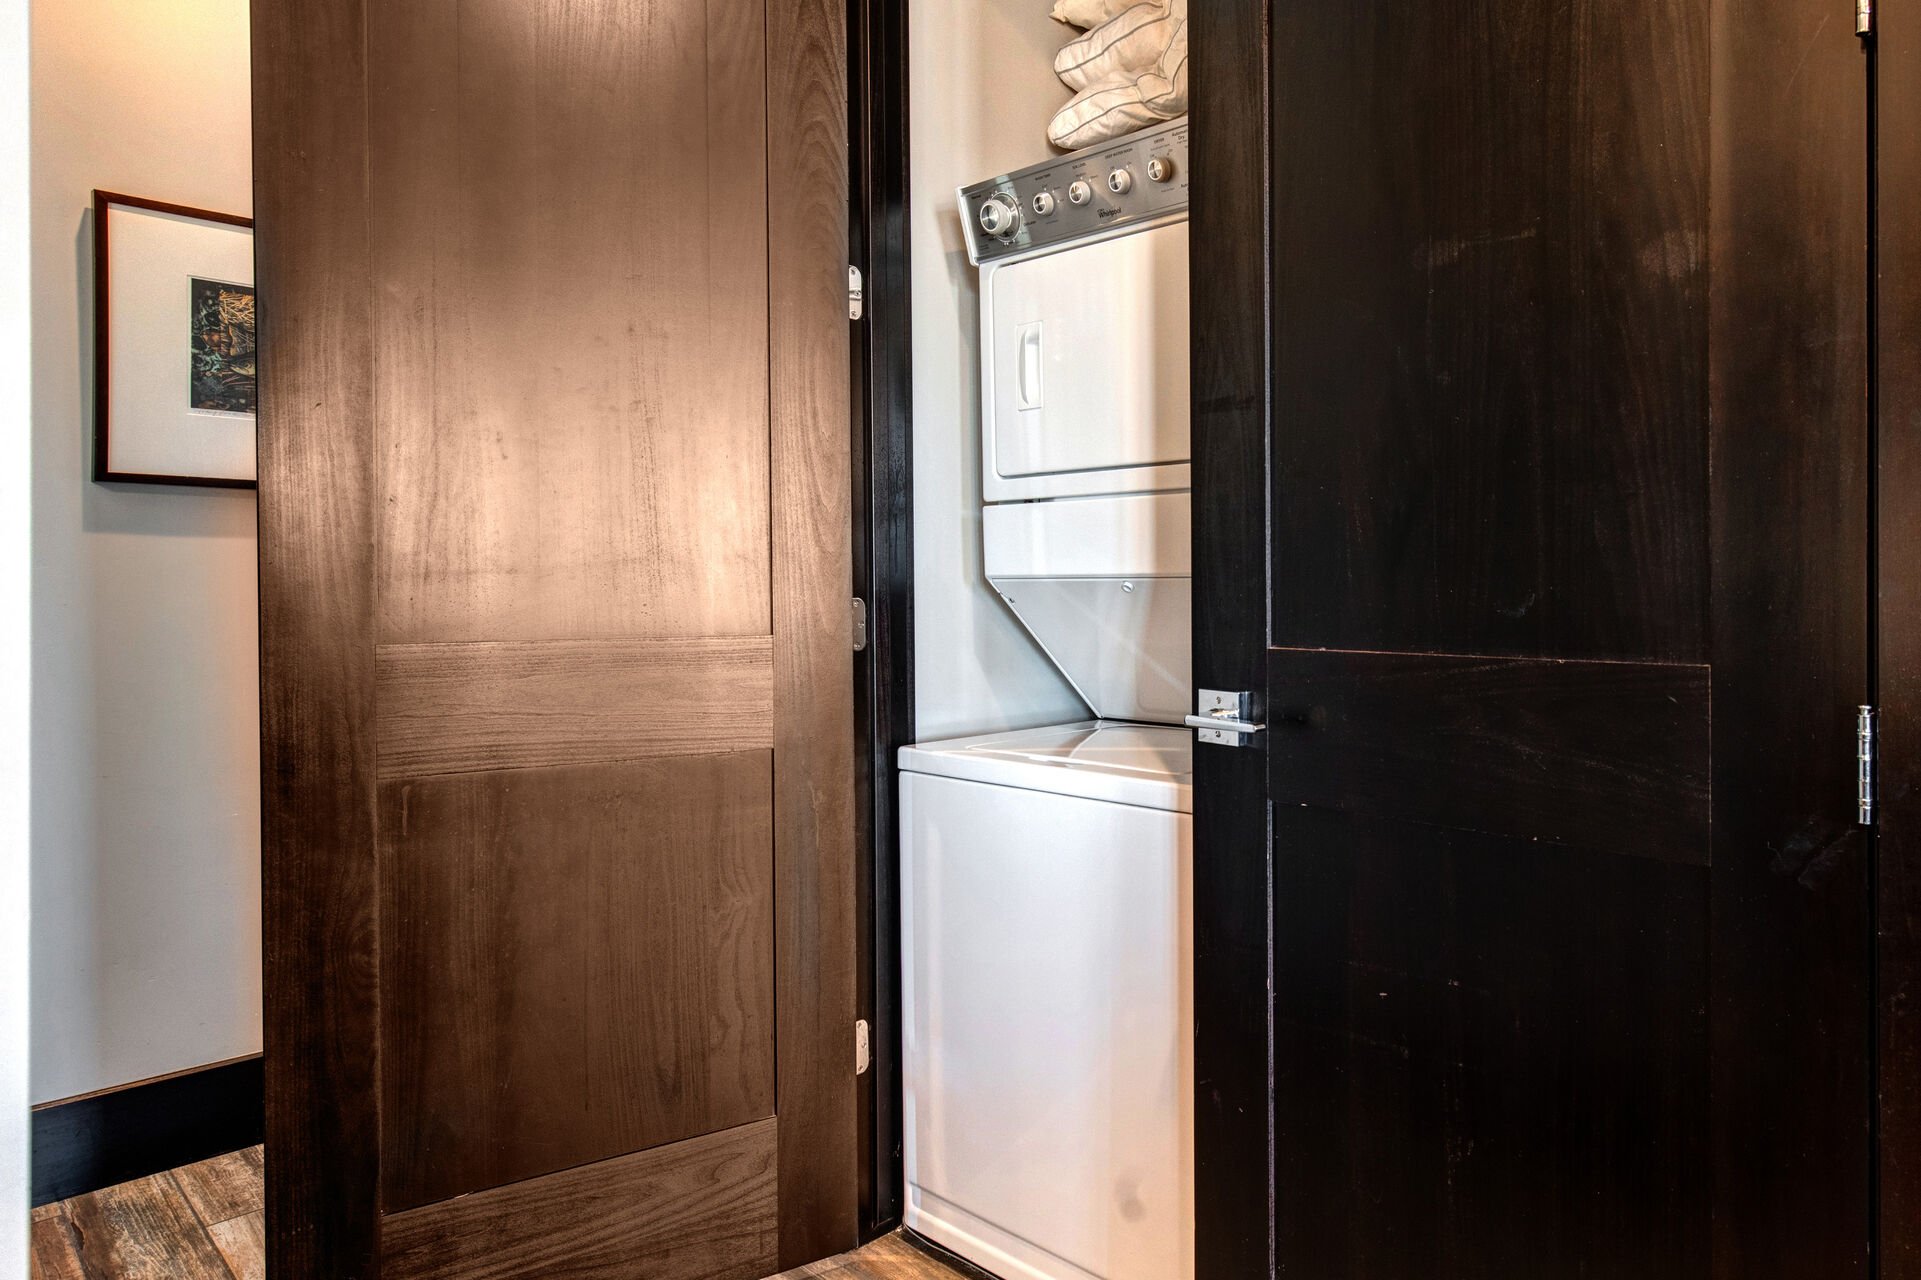 Private washer and Dryer closet off kitchen